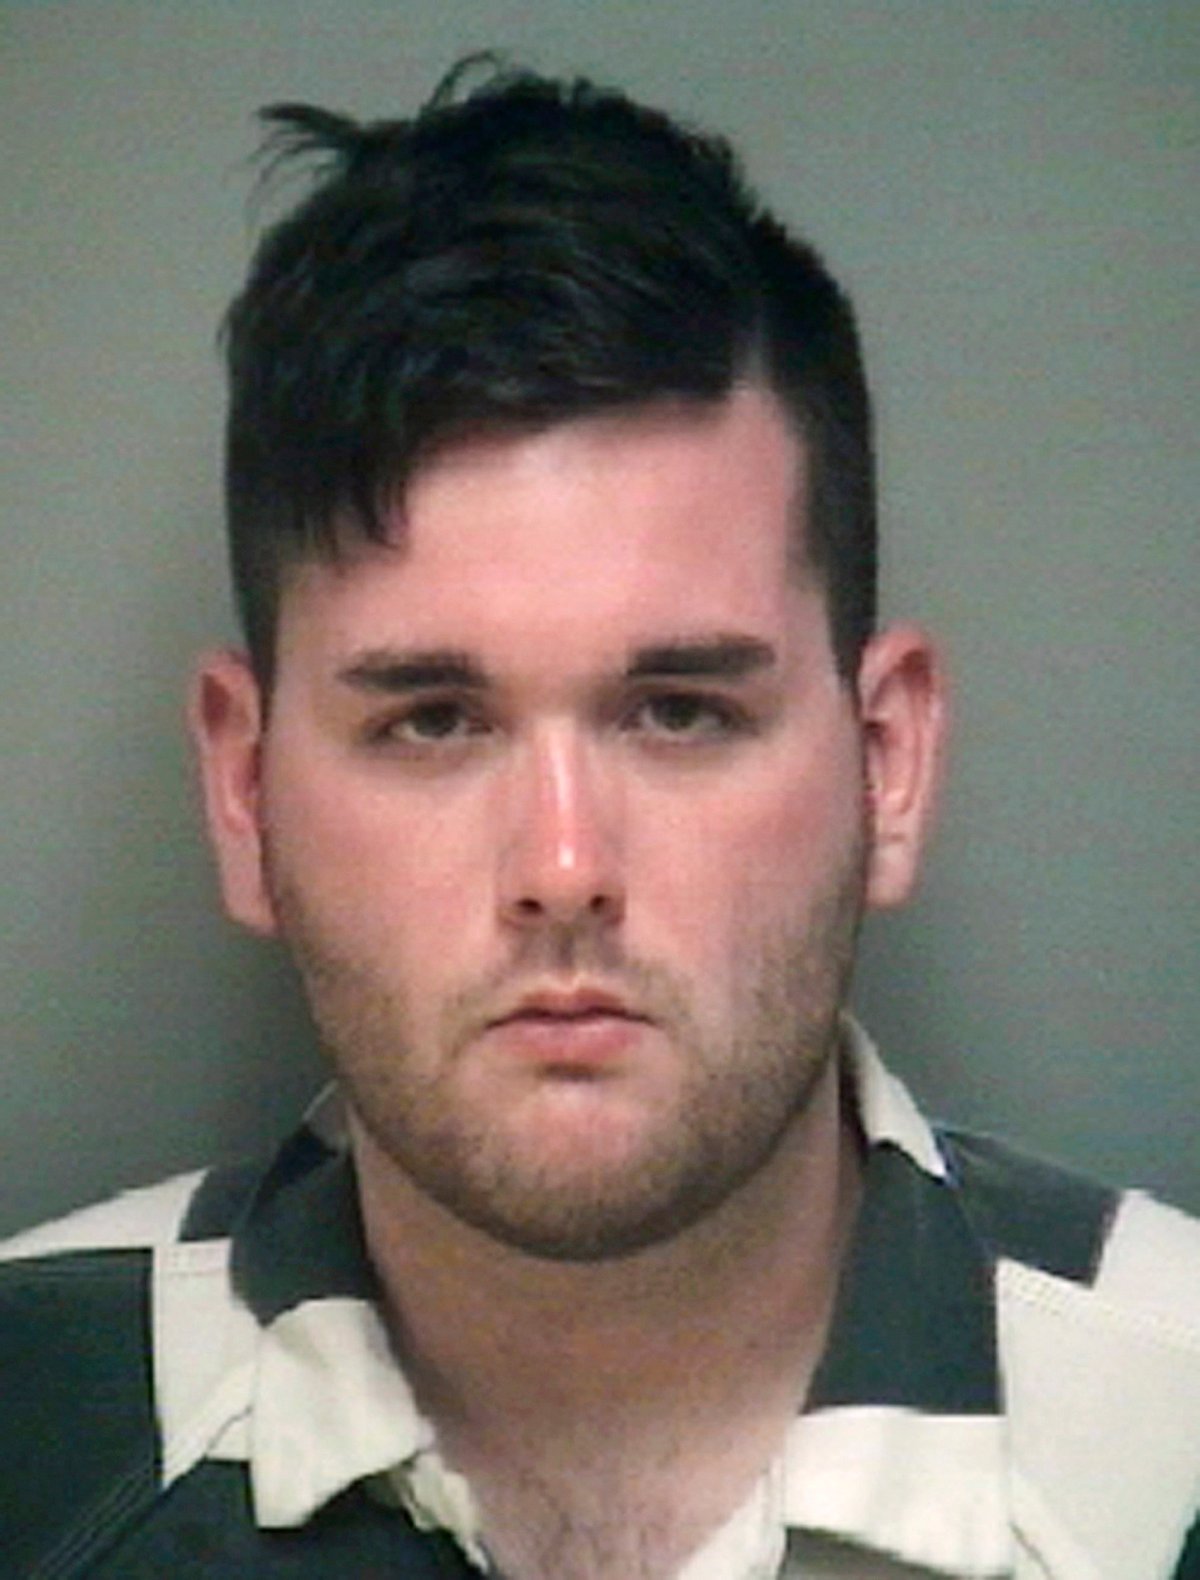 FILE - This undated file photo provided by the Albemarle-Charlottesville Regional Jail shows James Alex Fields Jr.